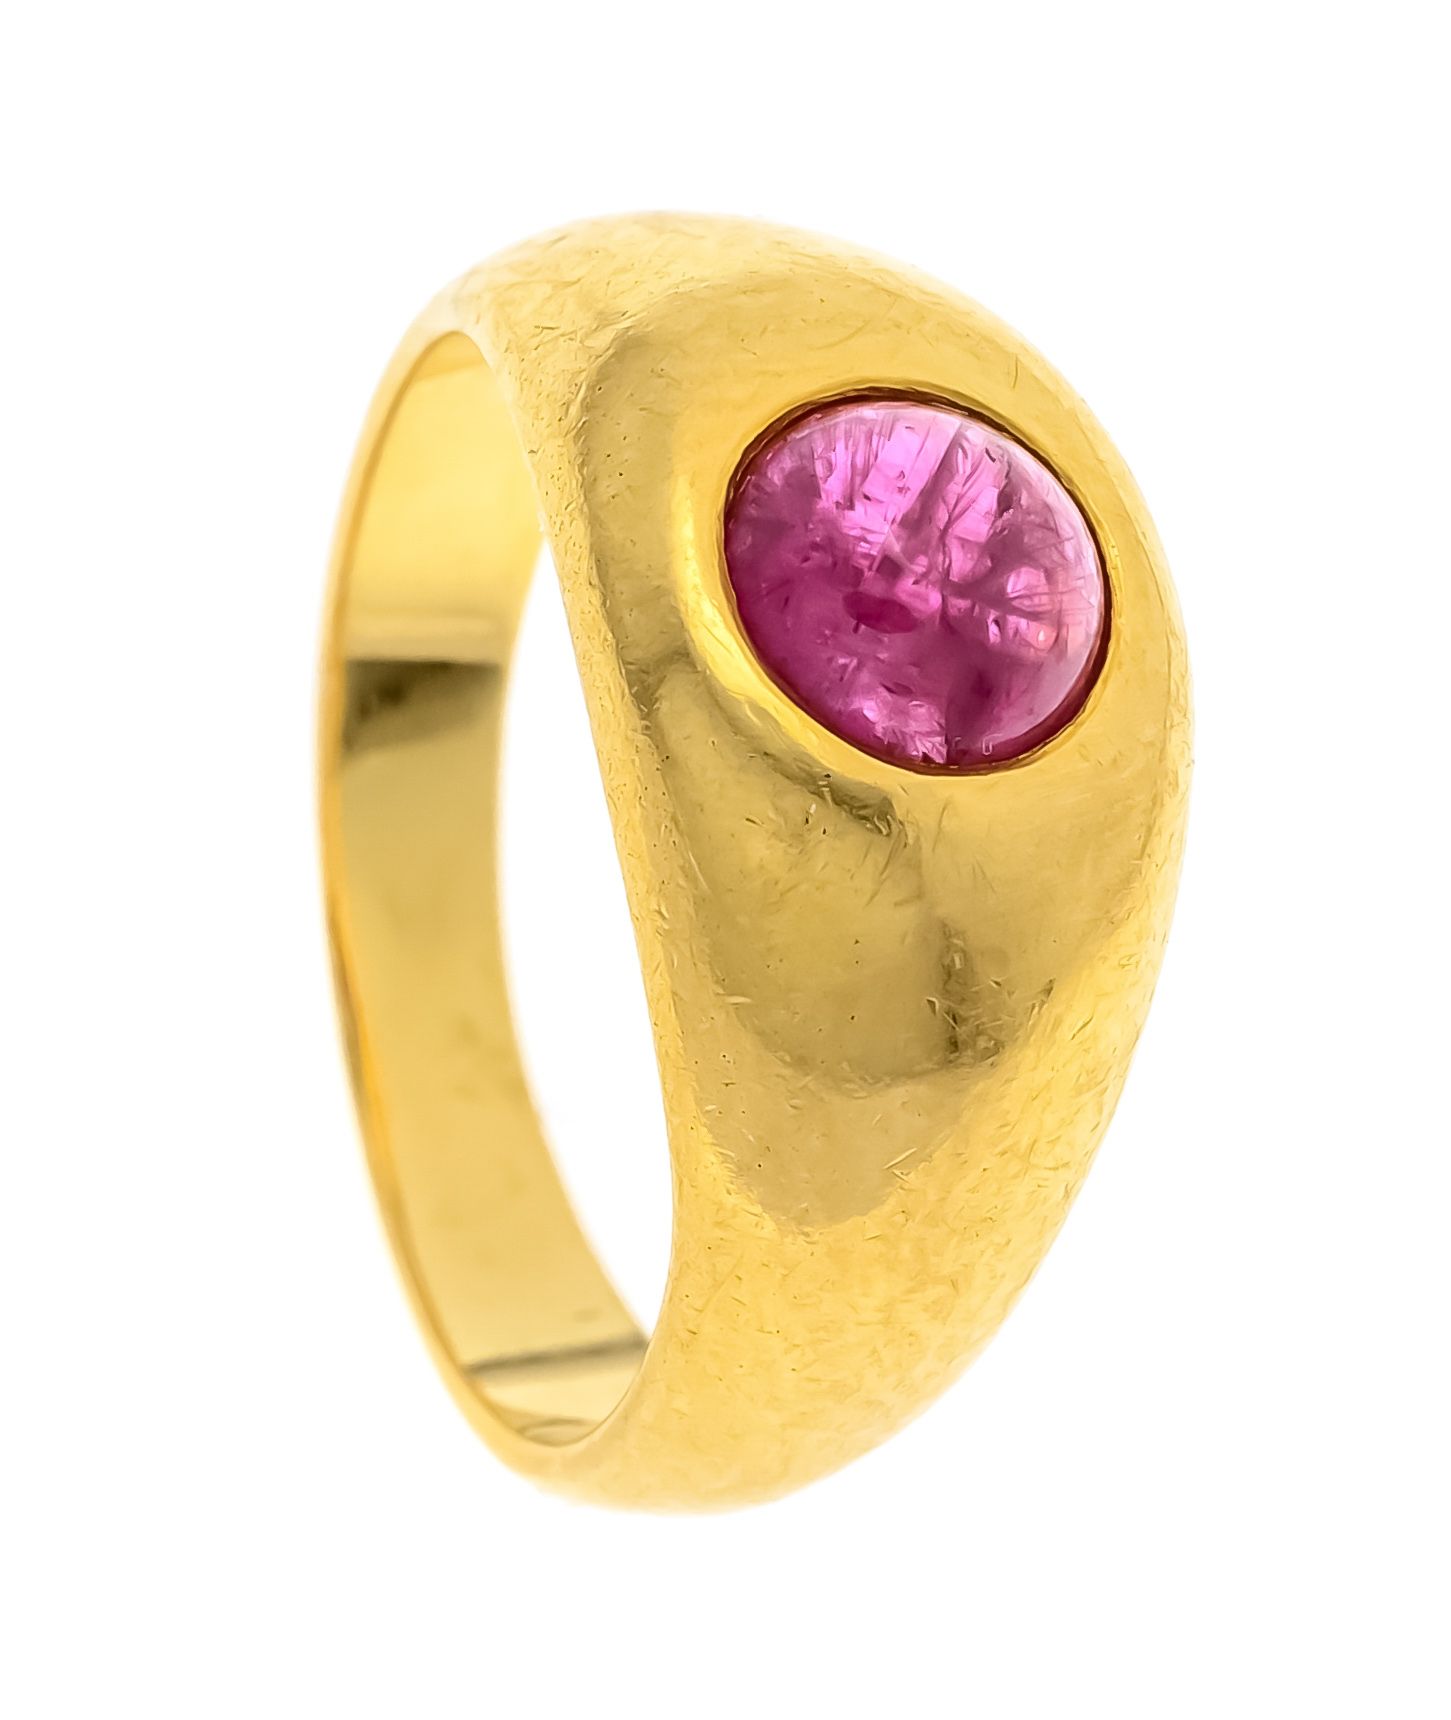 Null Ruby ring GG 750/000 with one round ruby cabochon 5,5mm, red, translucent, &hellip;